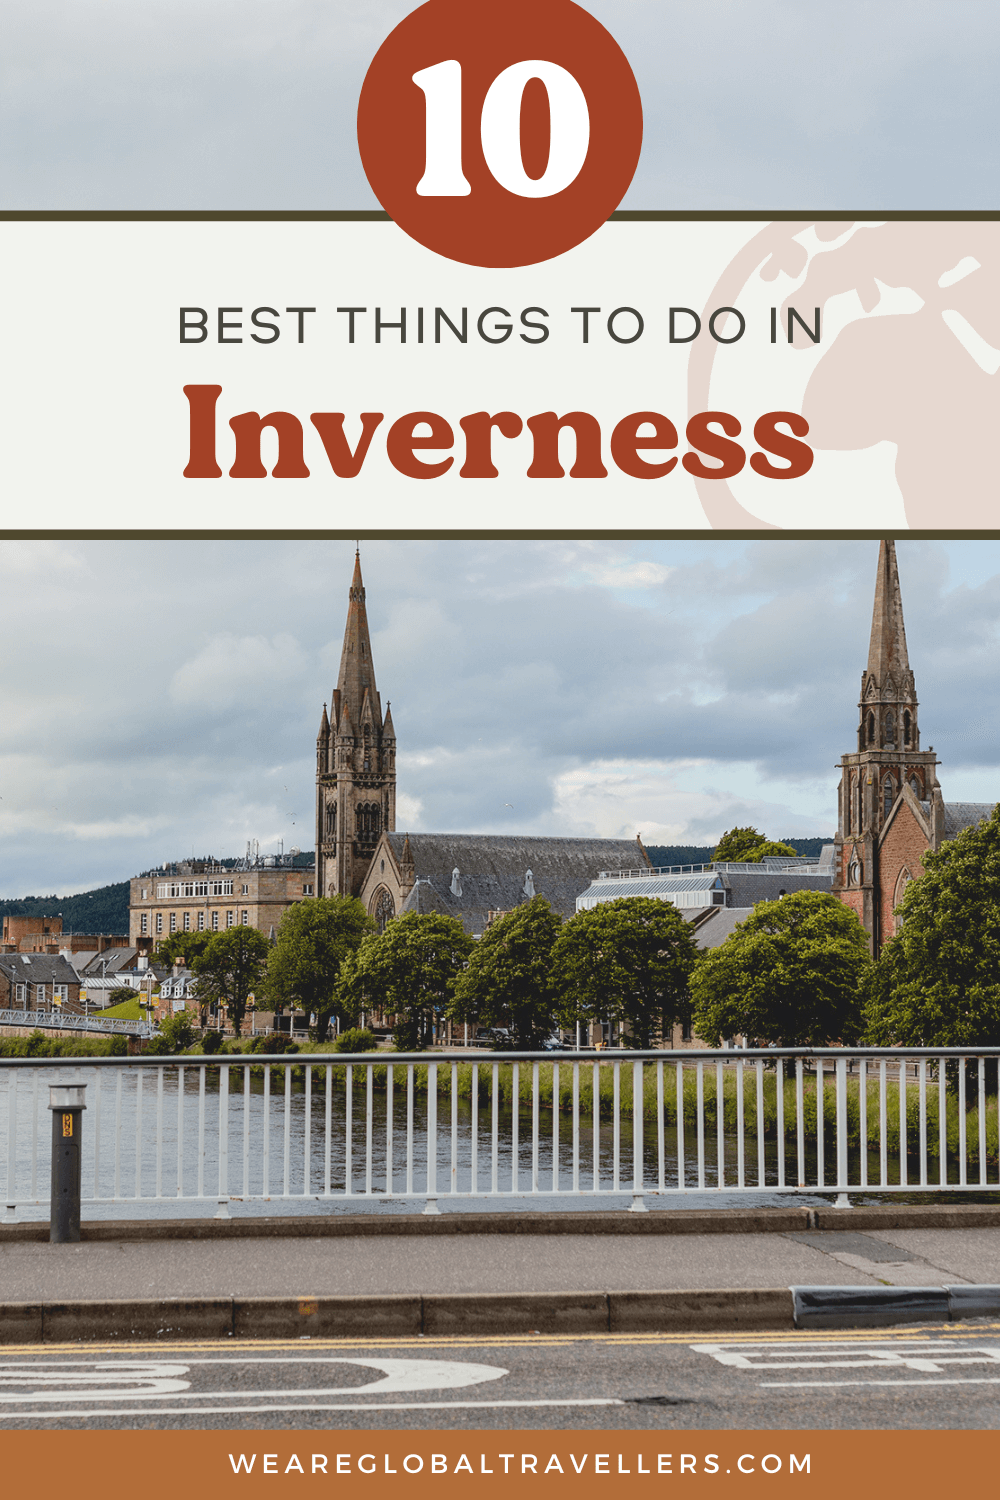 The best things to do in Inverness, Scotland